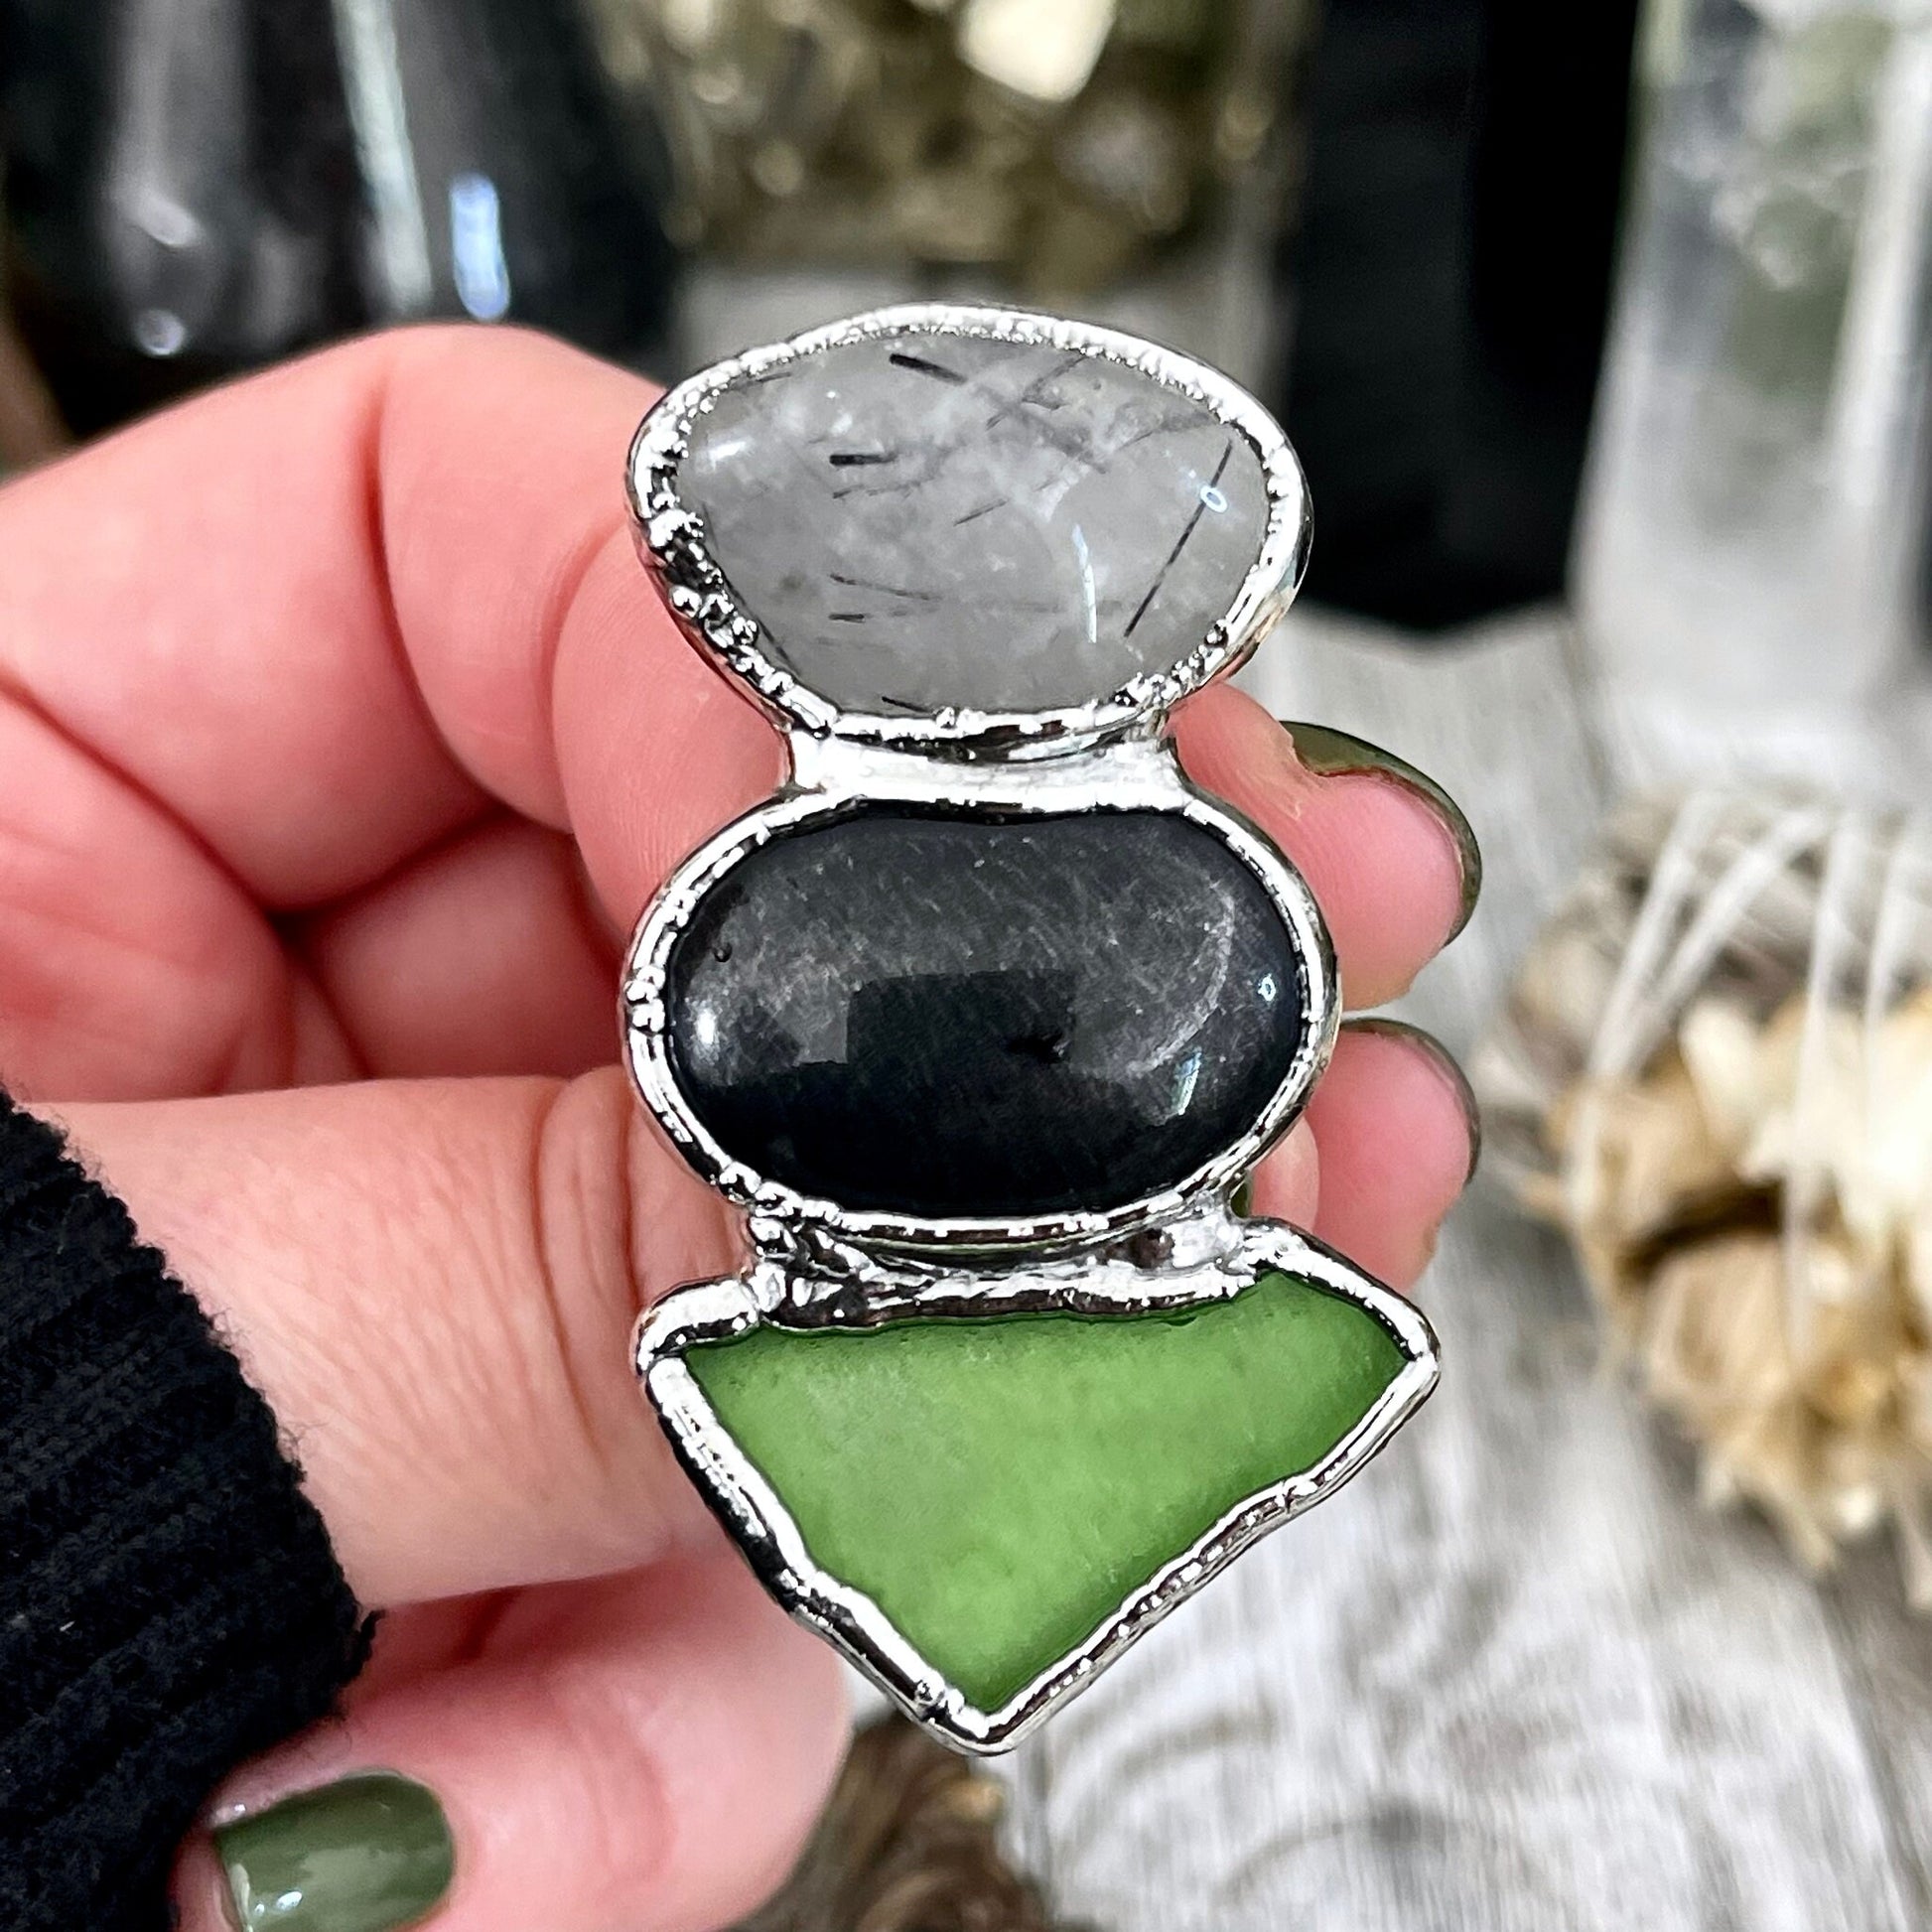 Size 8 Crystal Ring - Three Stone Black Onyx Sea Glass Tourmaline Quartz Ring Sliver / Foxlark Collection - One of a Kind / Crystal Jewelry